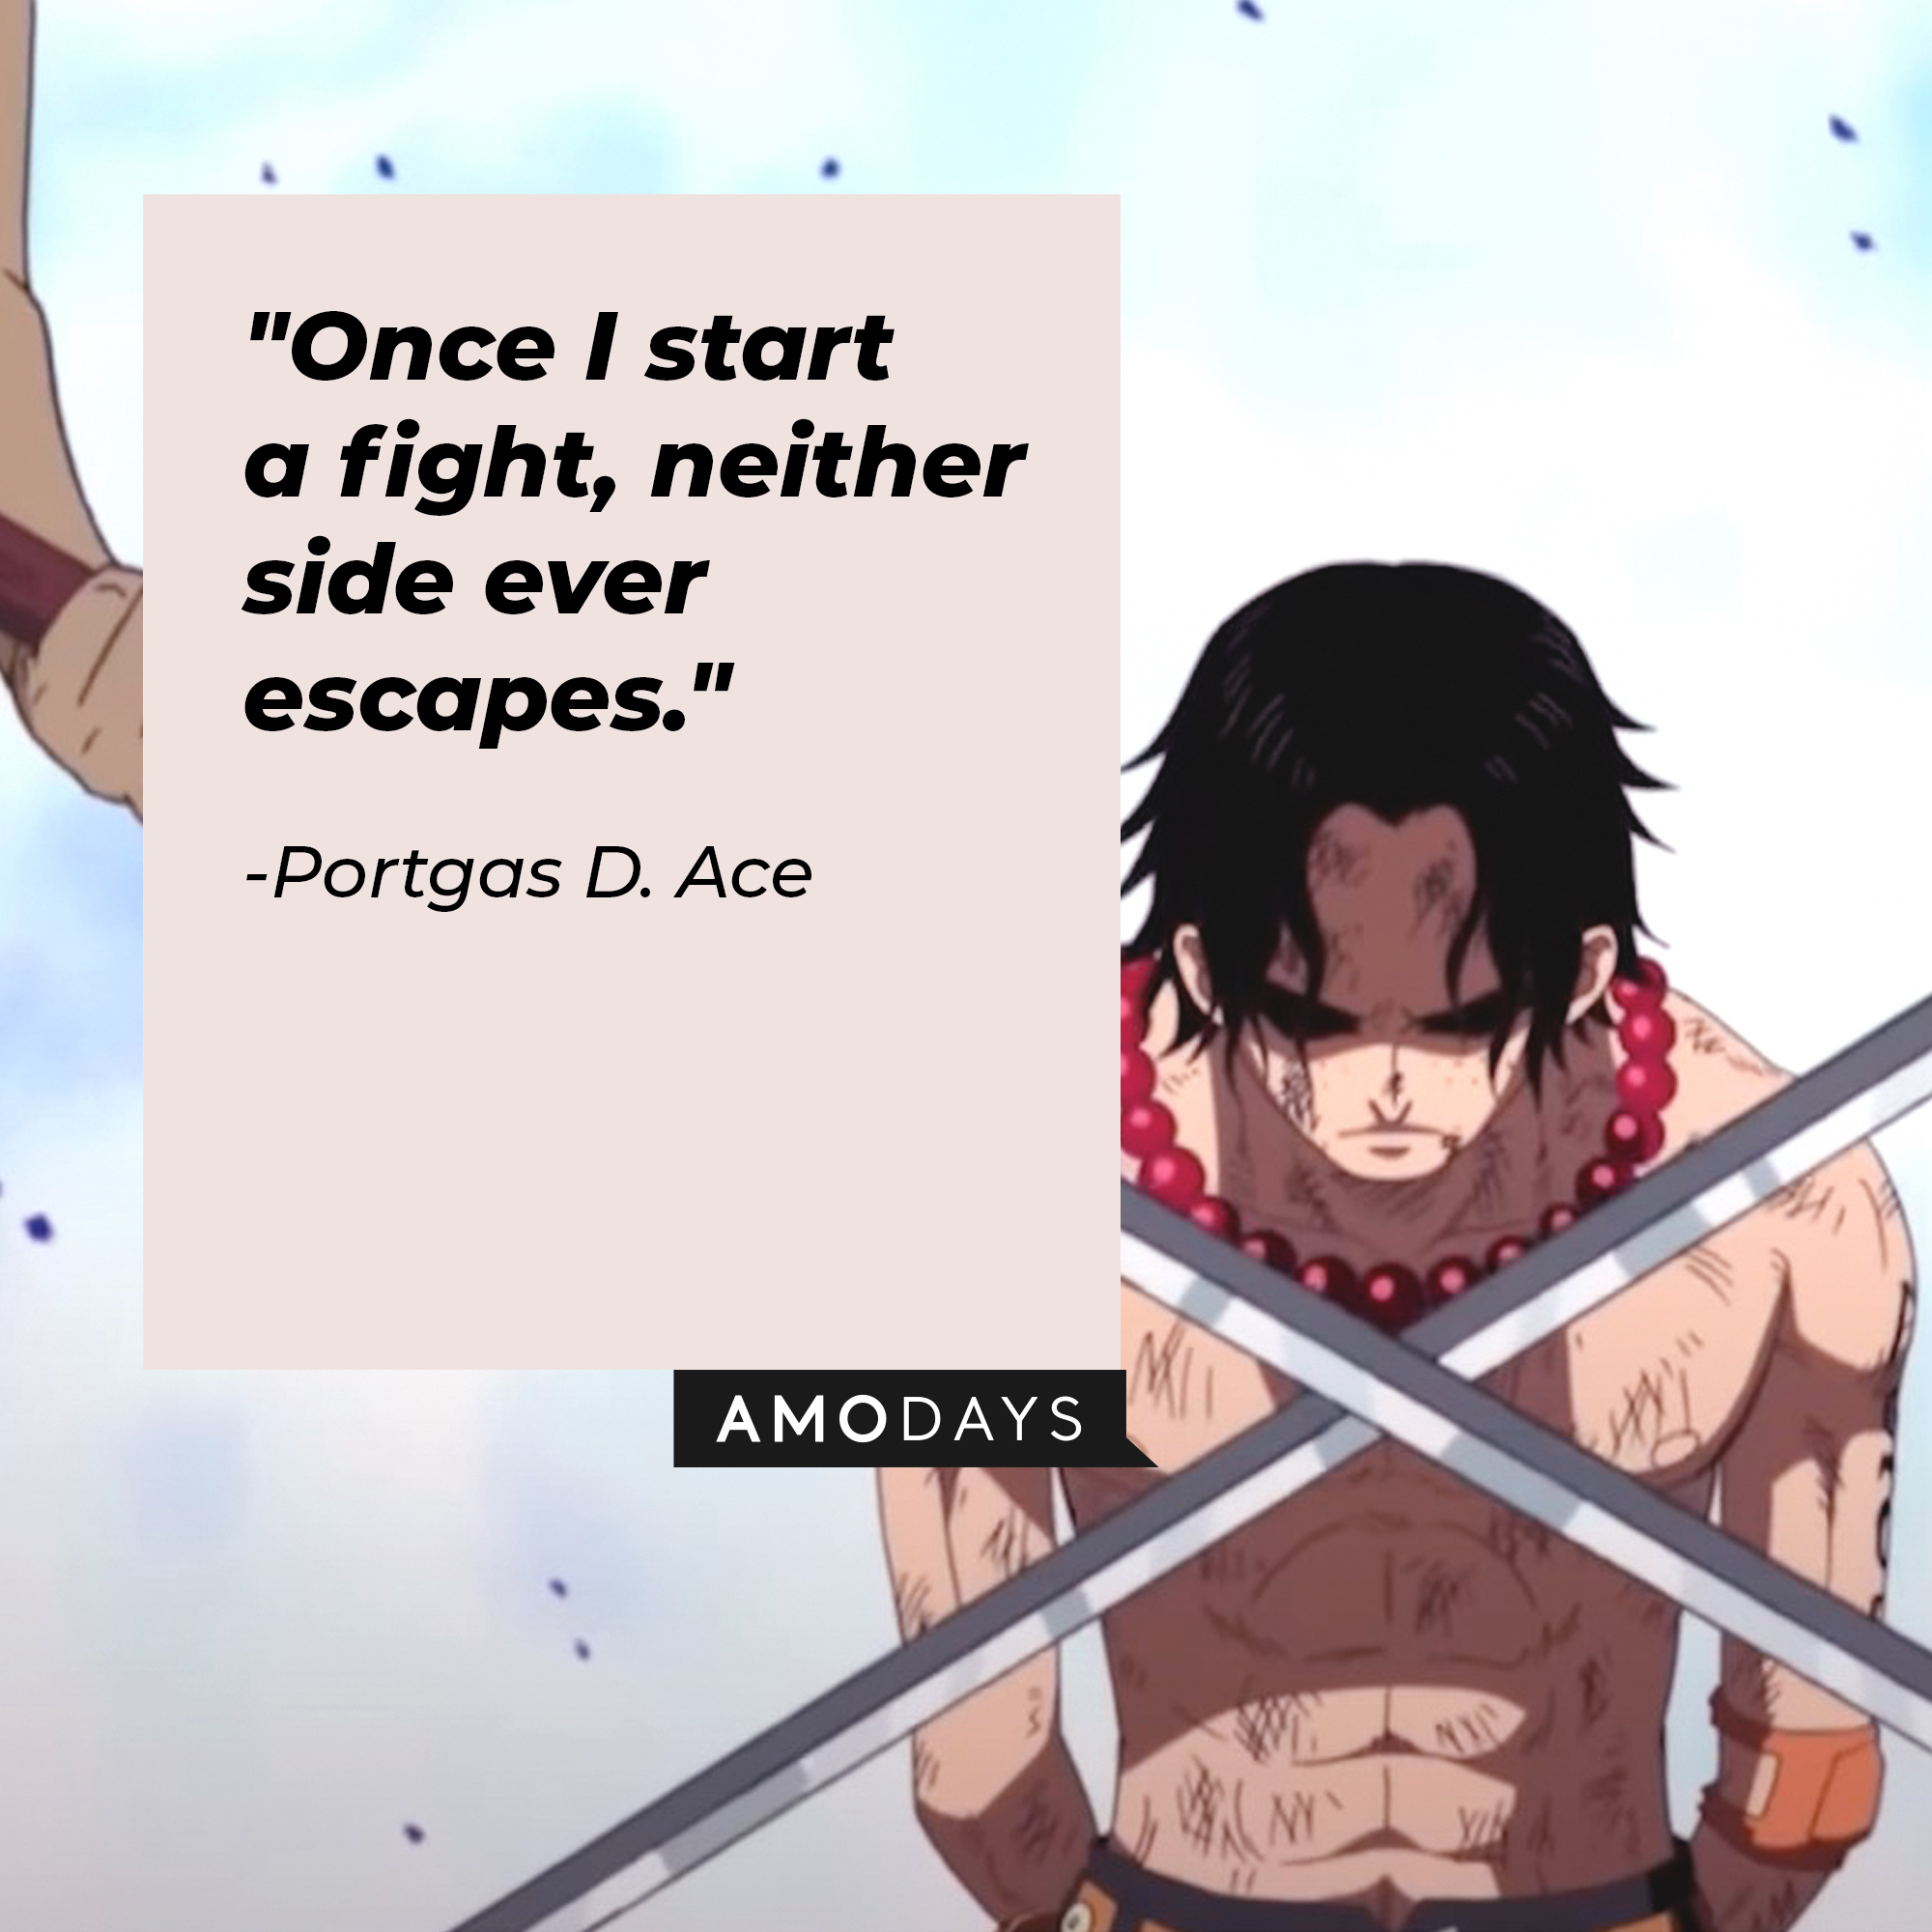 Portgas D. Ac with a text overlay reading, "Once I start a fight, neither side ever escapes." | Source: facebook.com/onepieceofficial